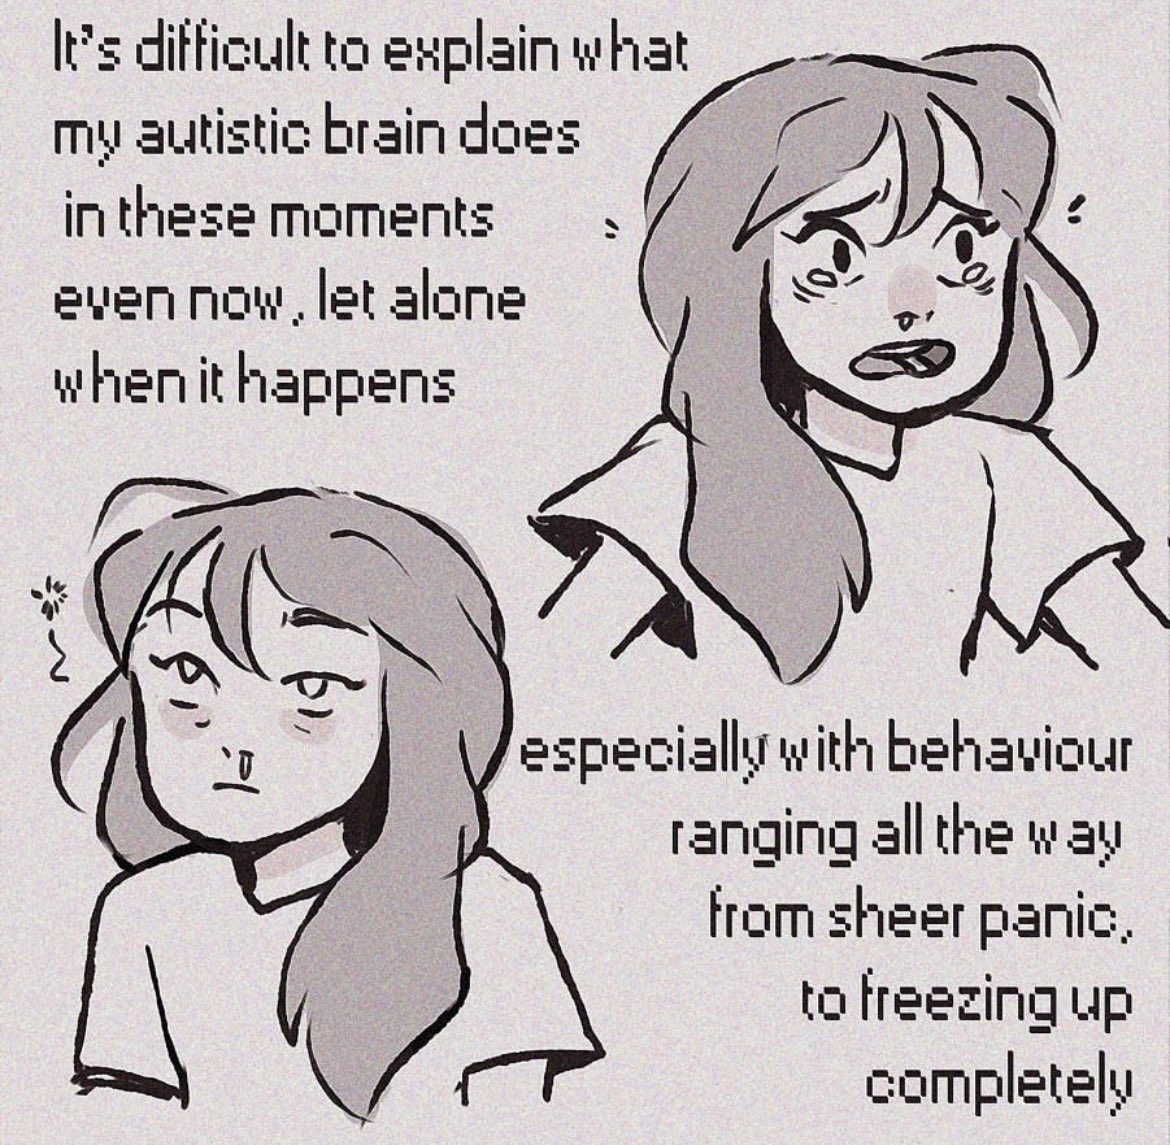 cause the good doctor cringe is all over our timelines and i actually feel a little mixed about it's representation of meltdowns i thought i'd share my meltdown comic ™ again 🥲 1/2